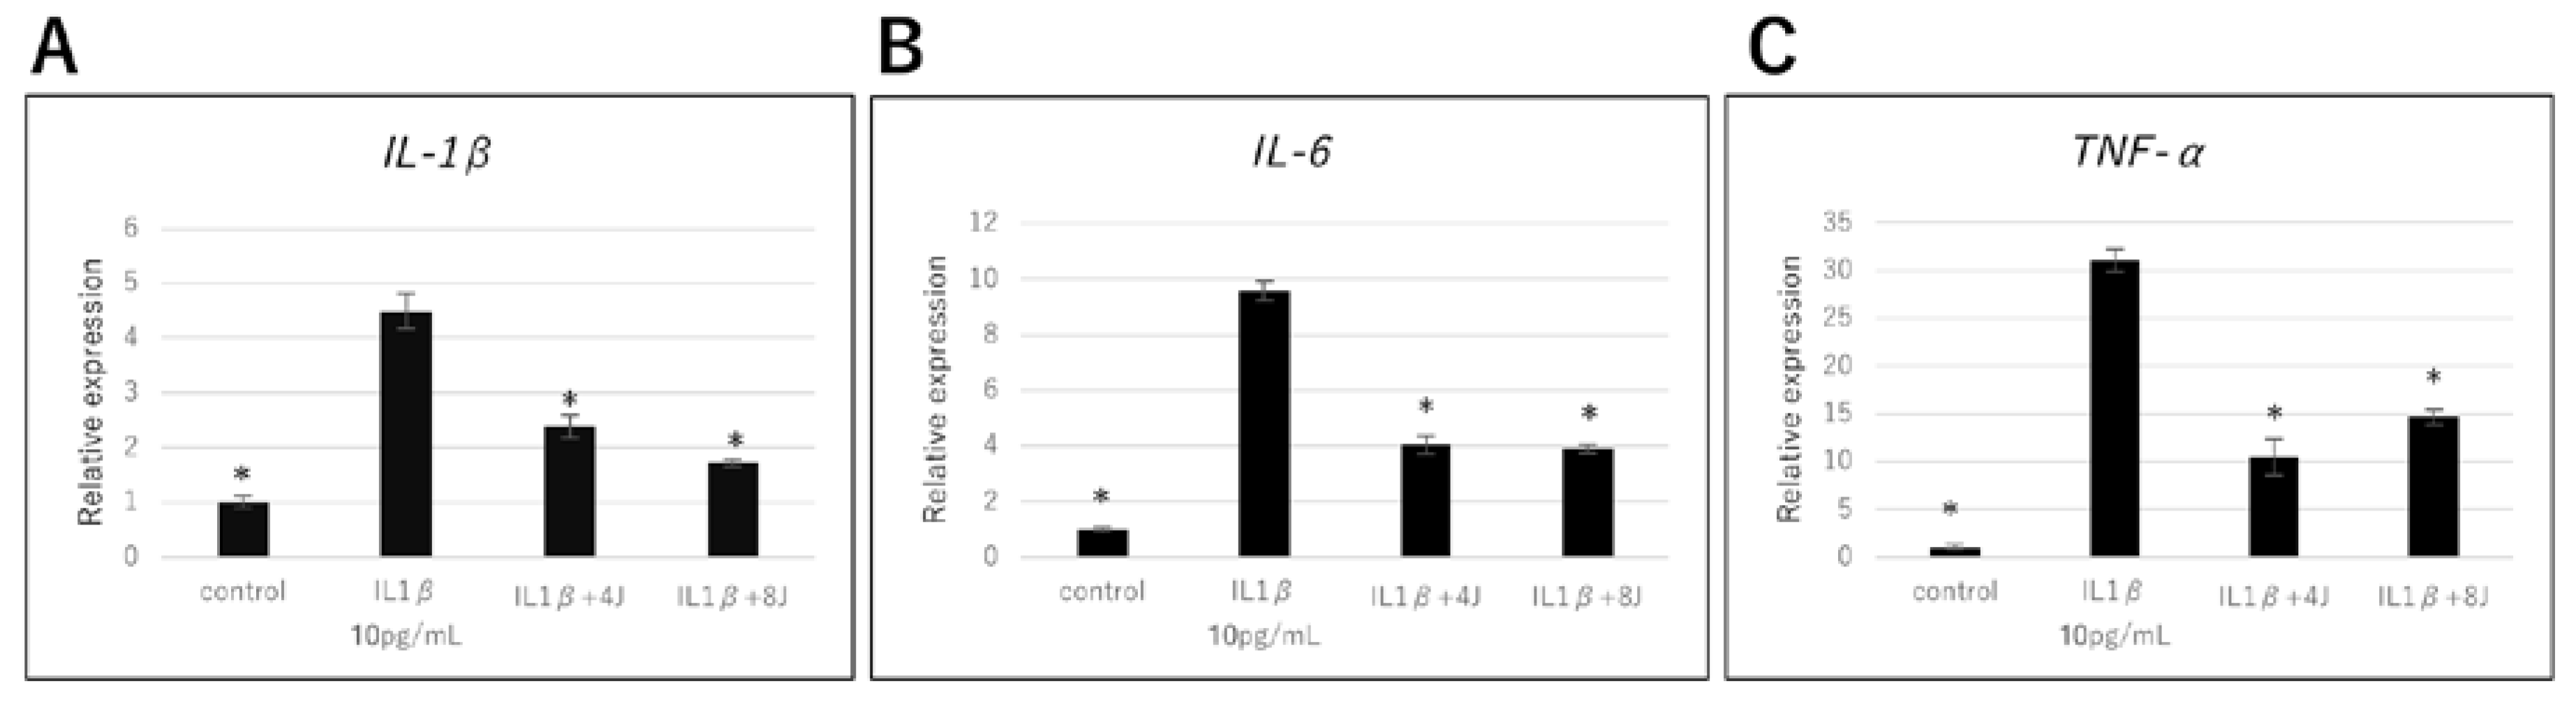 JCM | Free Full-Text | High-Frequency Near-Infrared Diode Laser Irradiation  Attenuates IL-1β-Induced Expression of Inflammatory Cytokines and Matrix  Metalloproteinases in Human Primary Chondrocytes | HTML